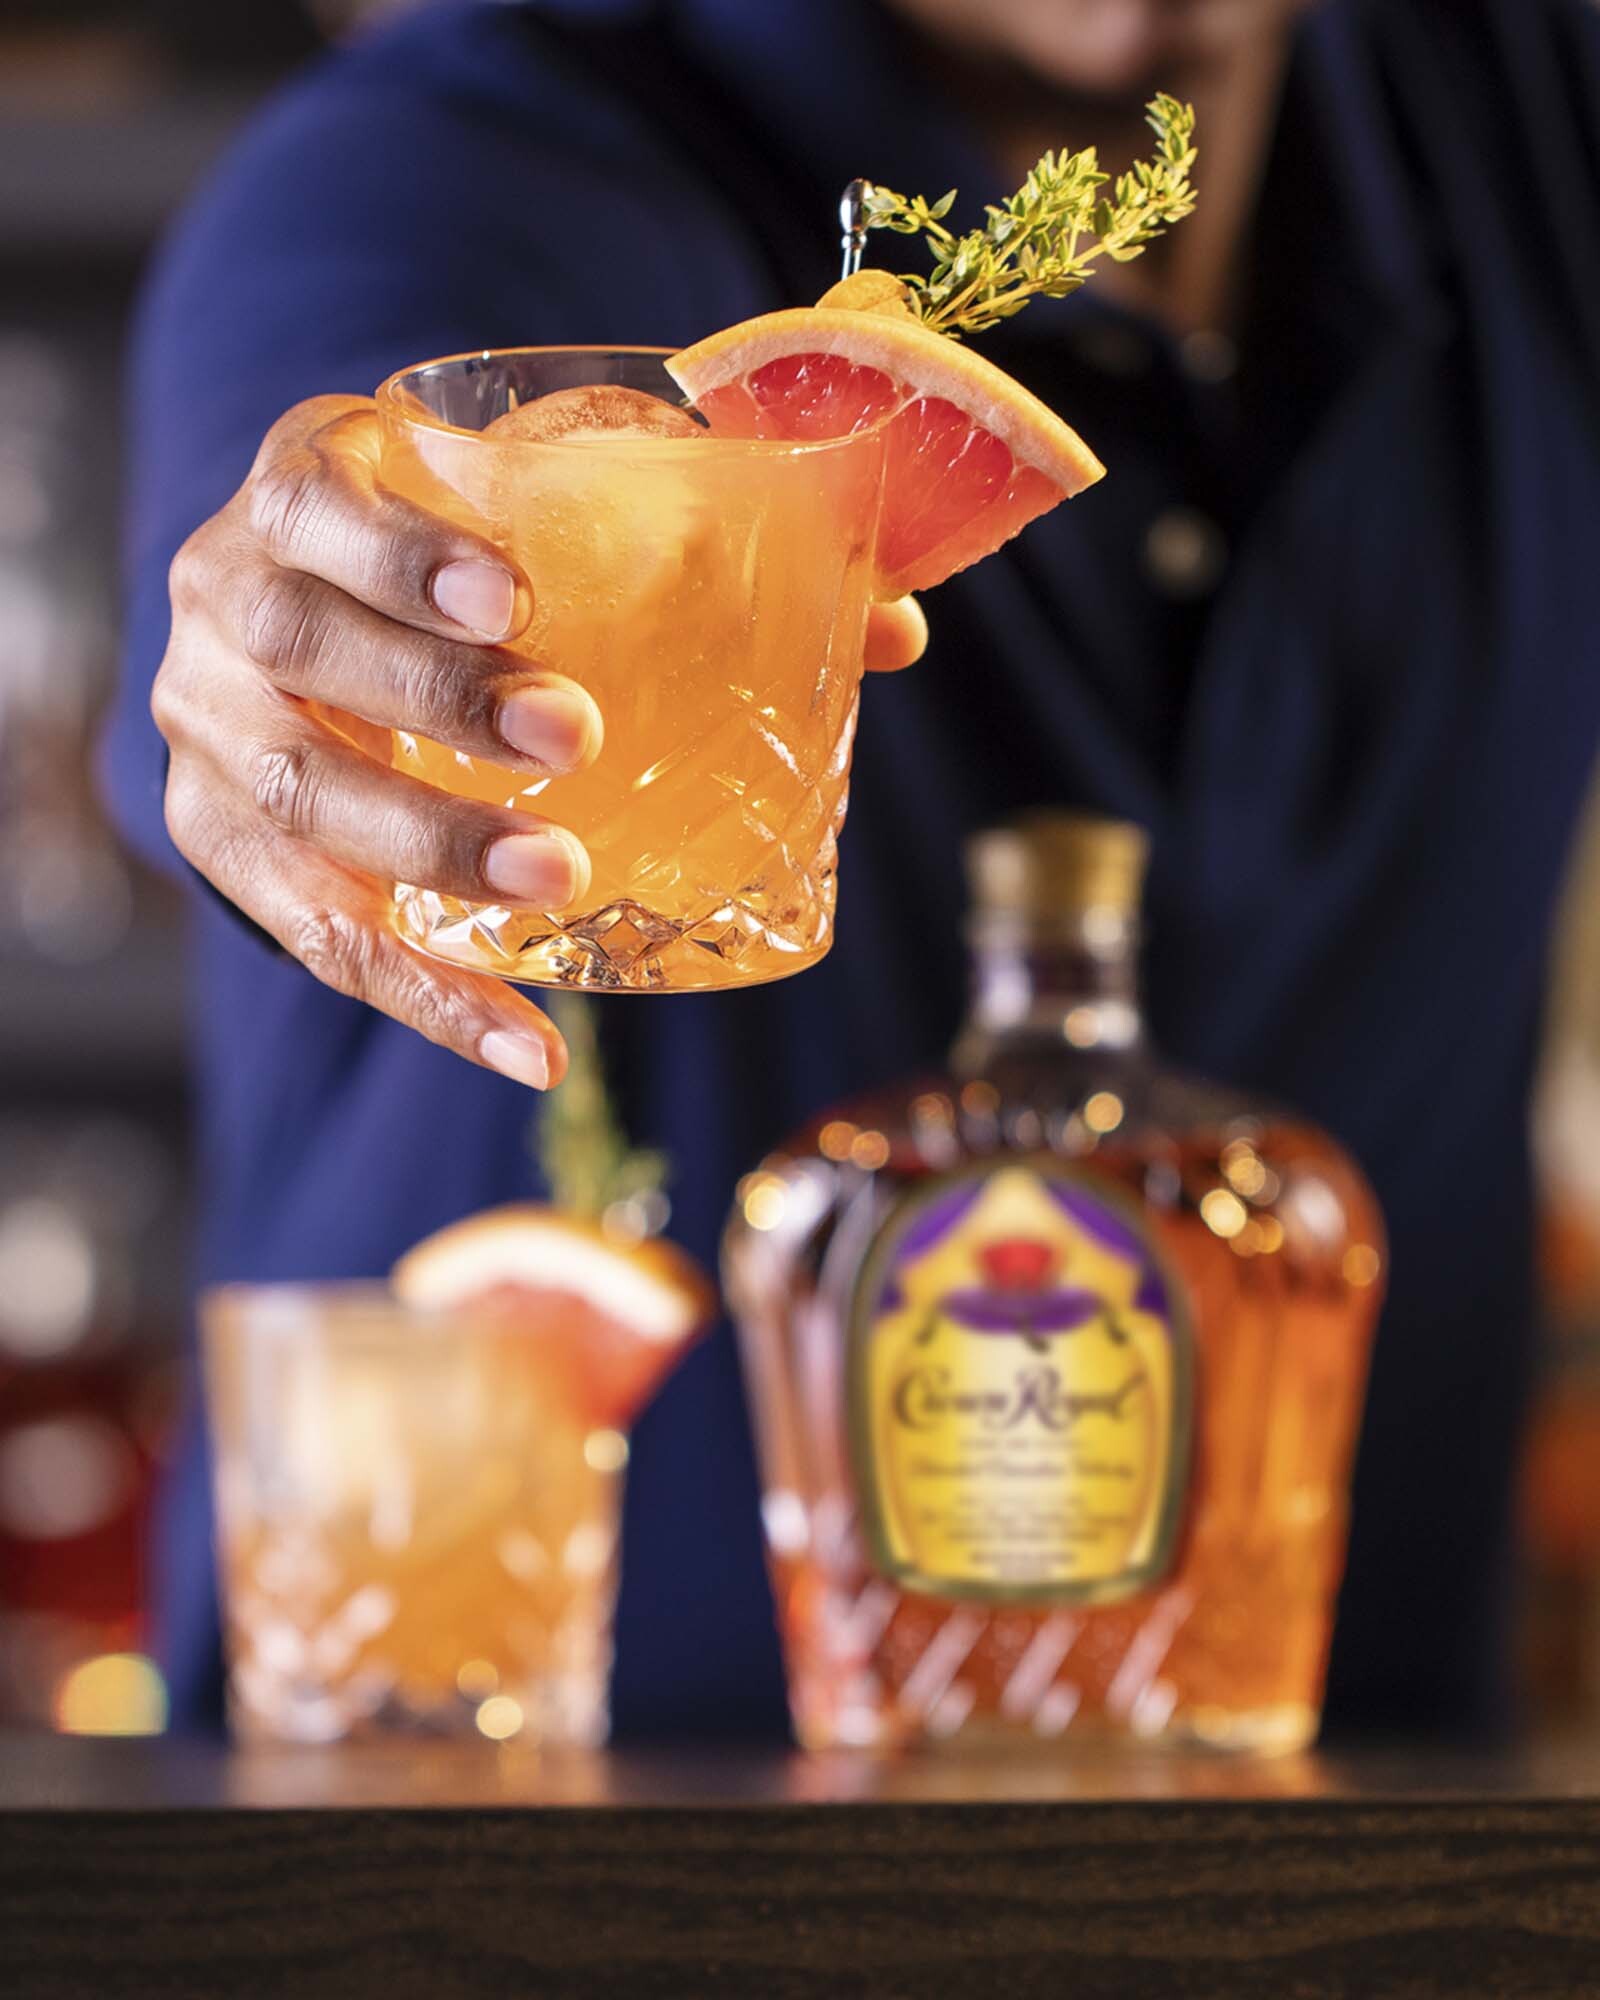 Crown Royal Grapefruit Old Fashioned Whisky Cocktail